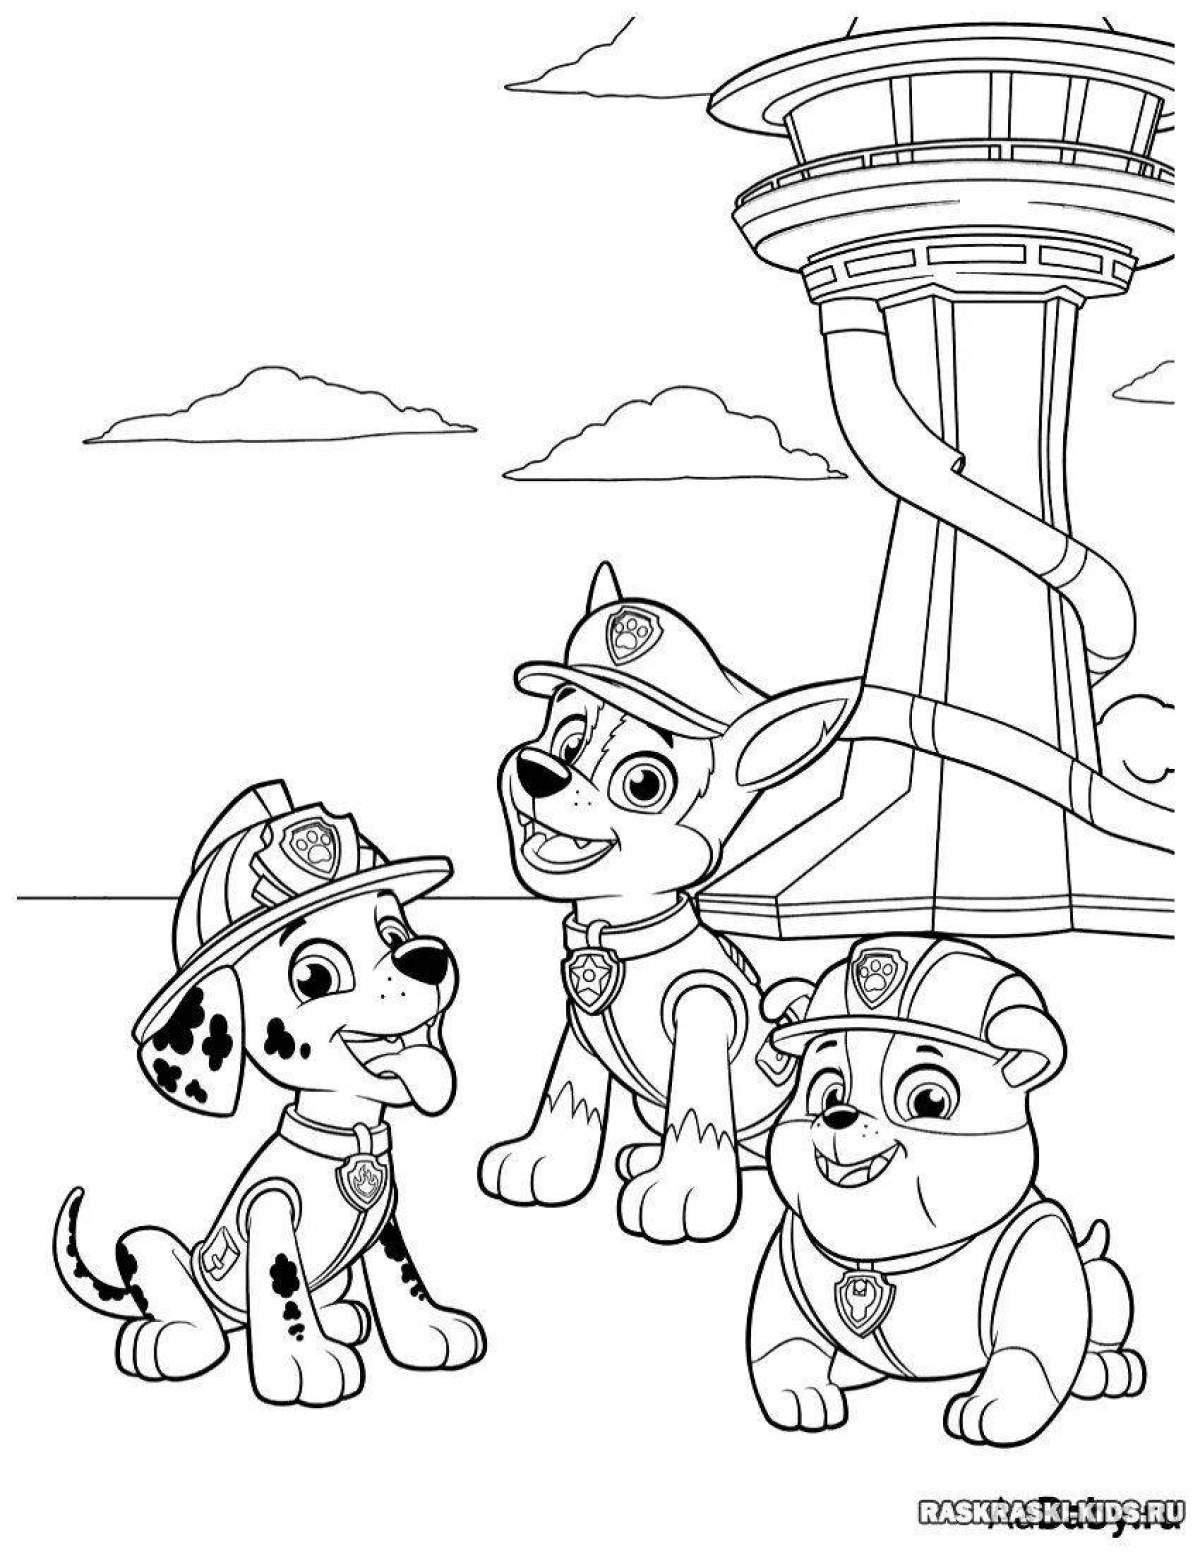 Paw patrol quality coloring book